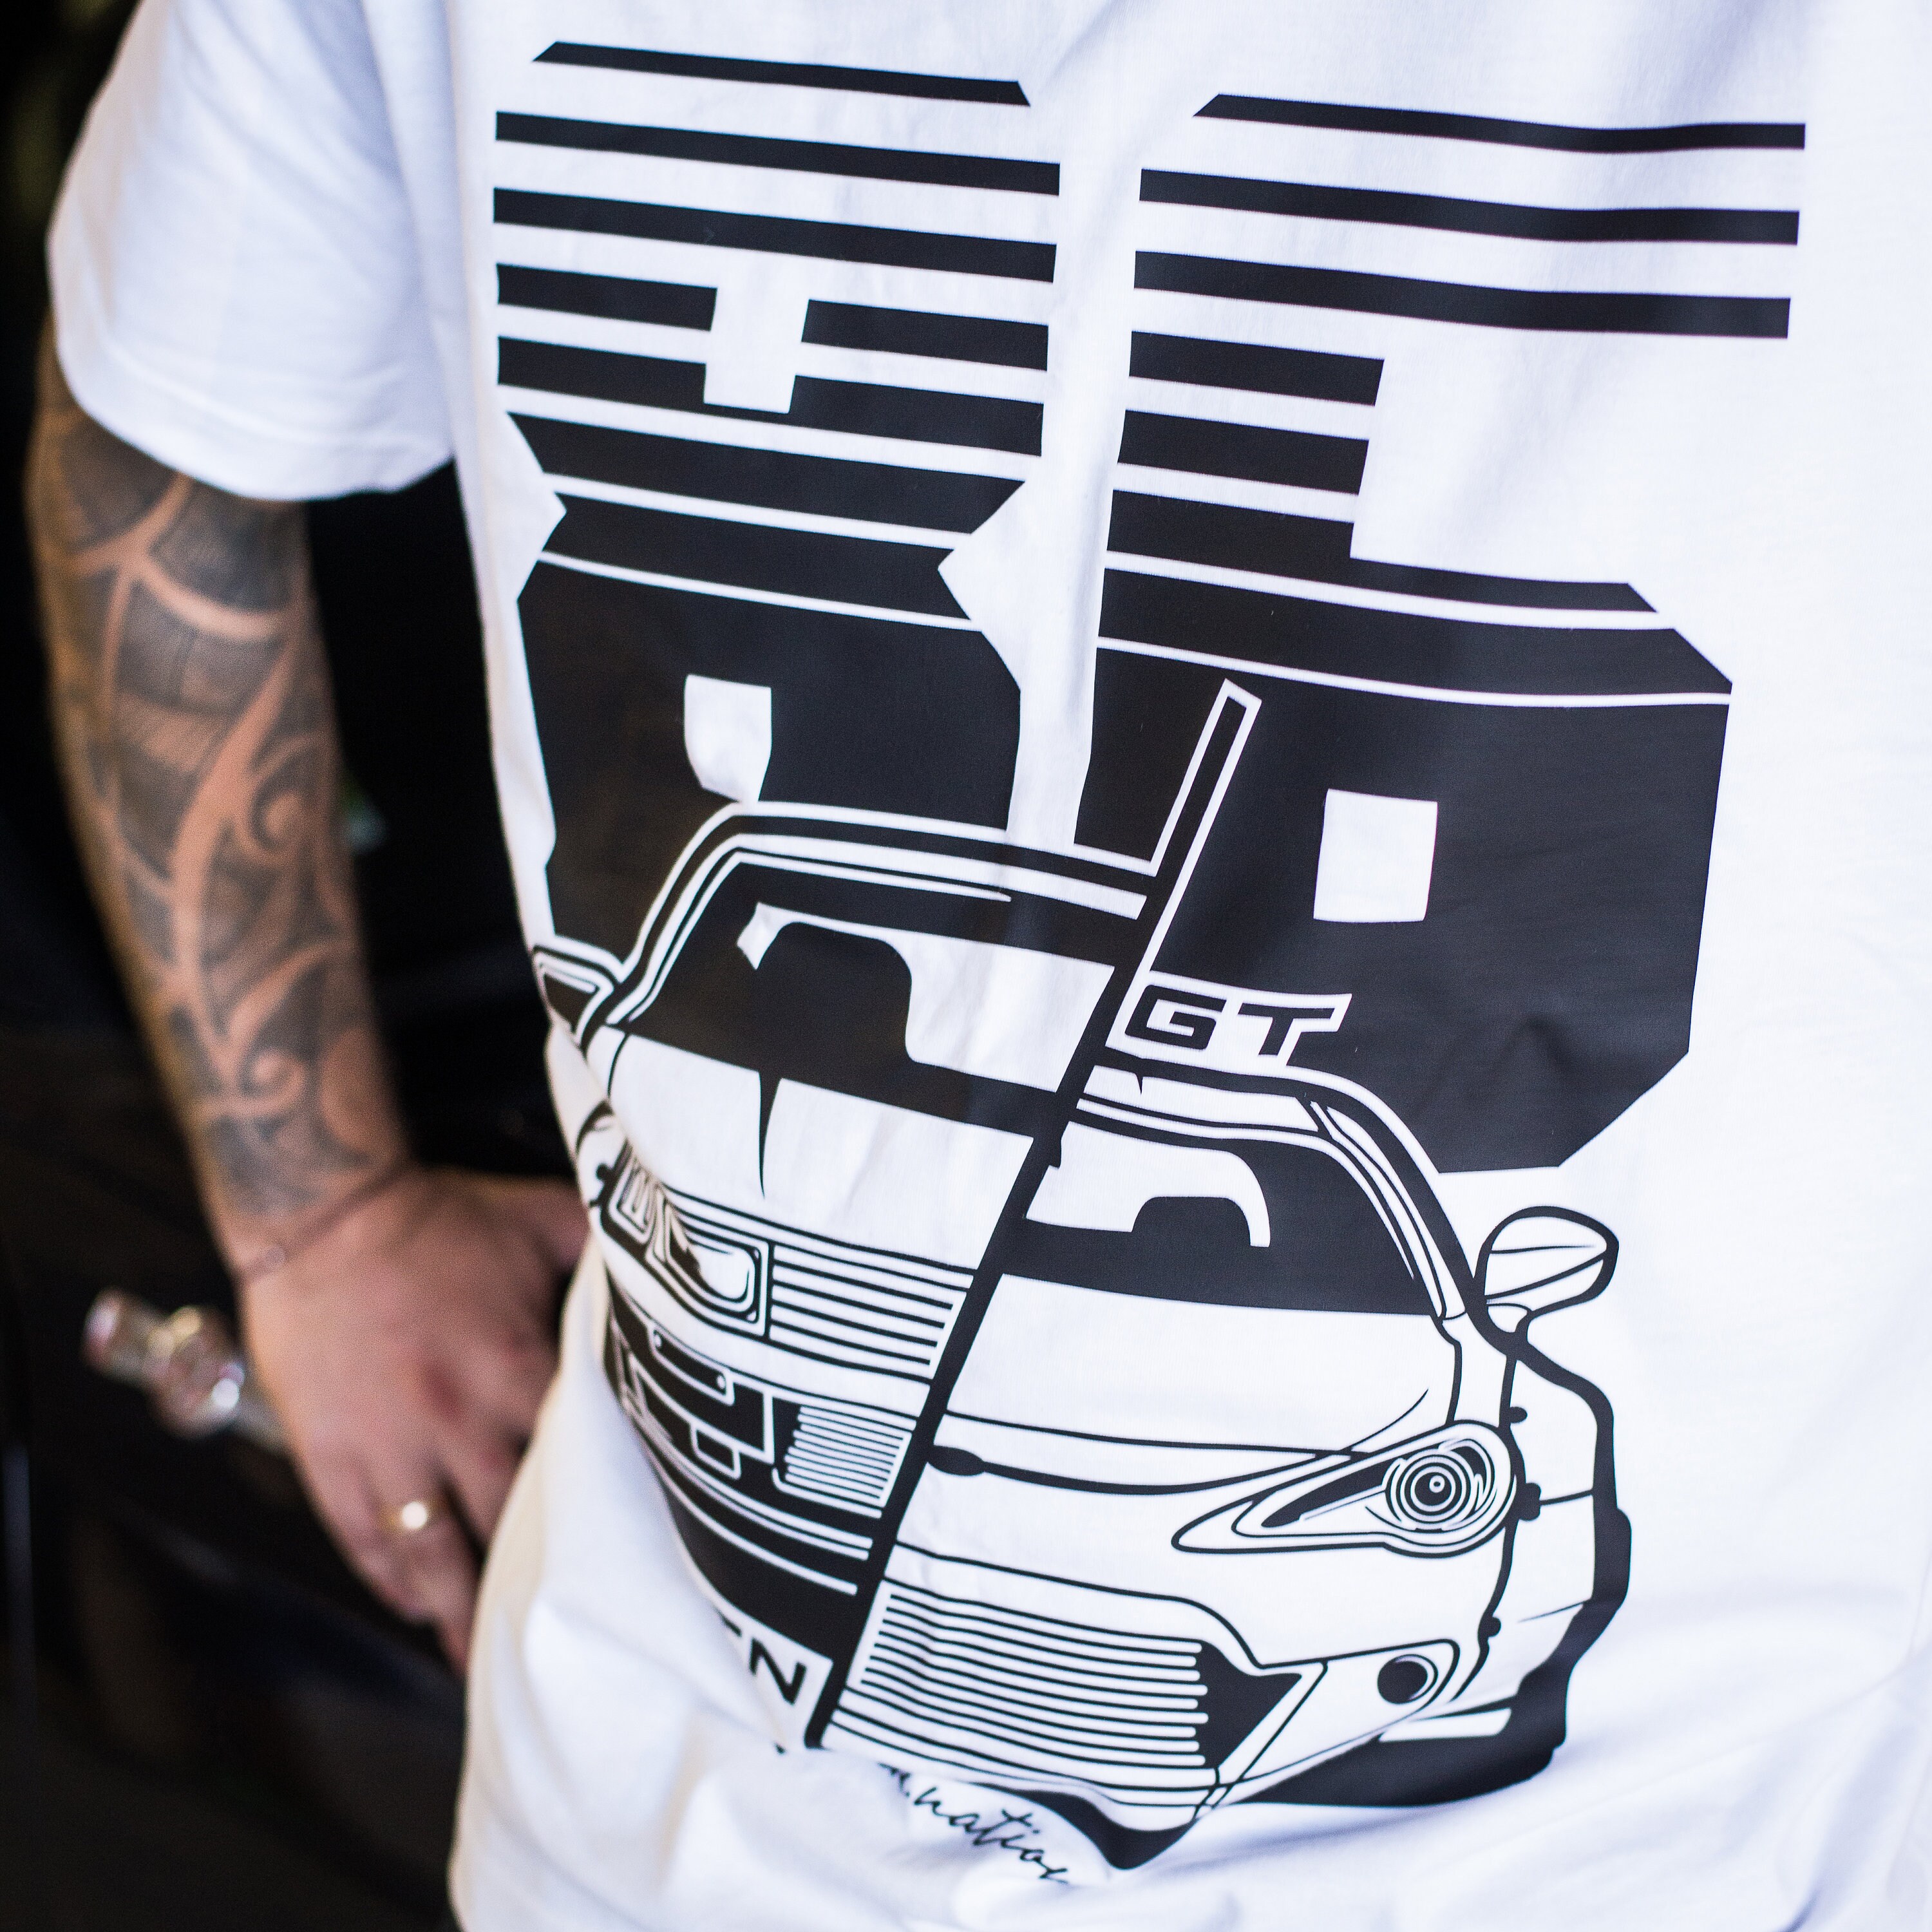 86 Levin/gt T-shirt for Toyota AE86 and GT86 Fans and Car - Etsy